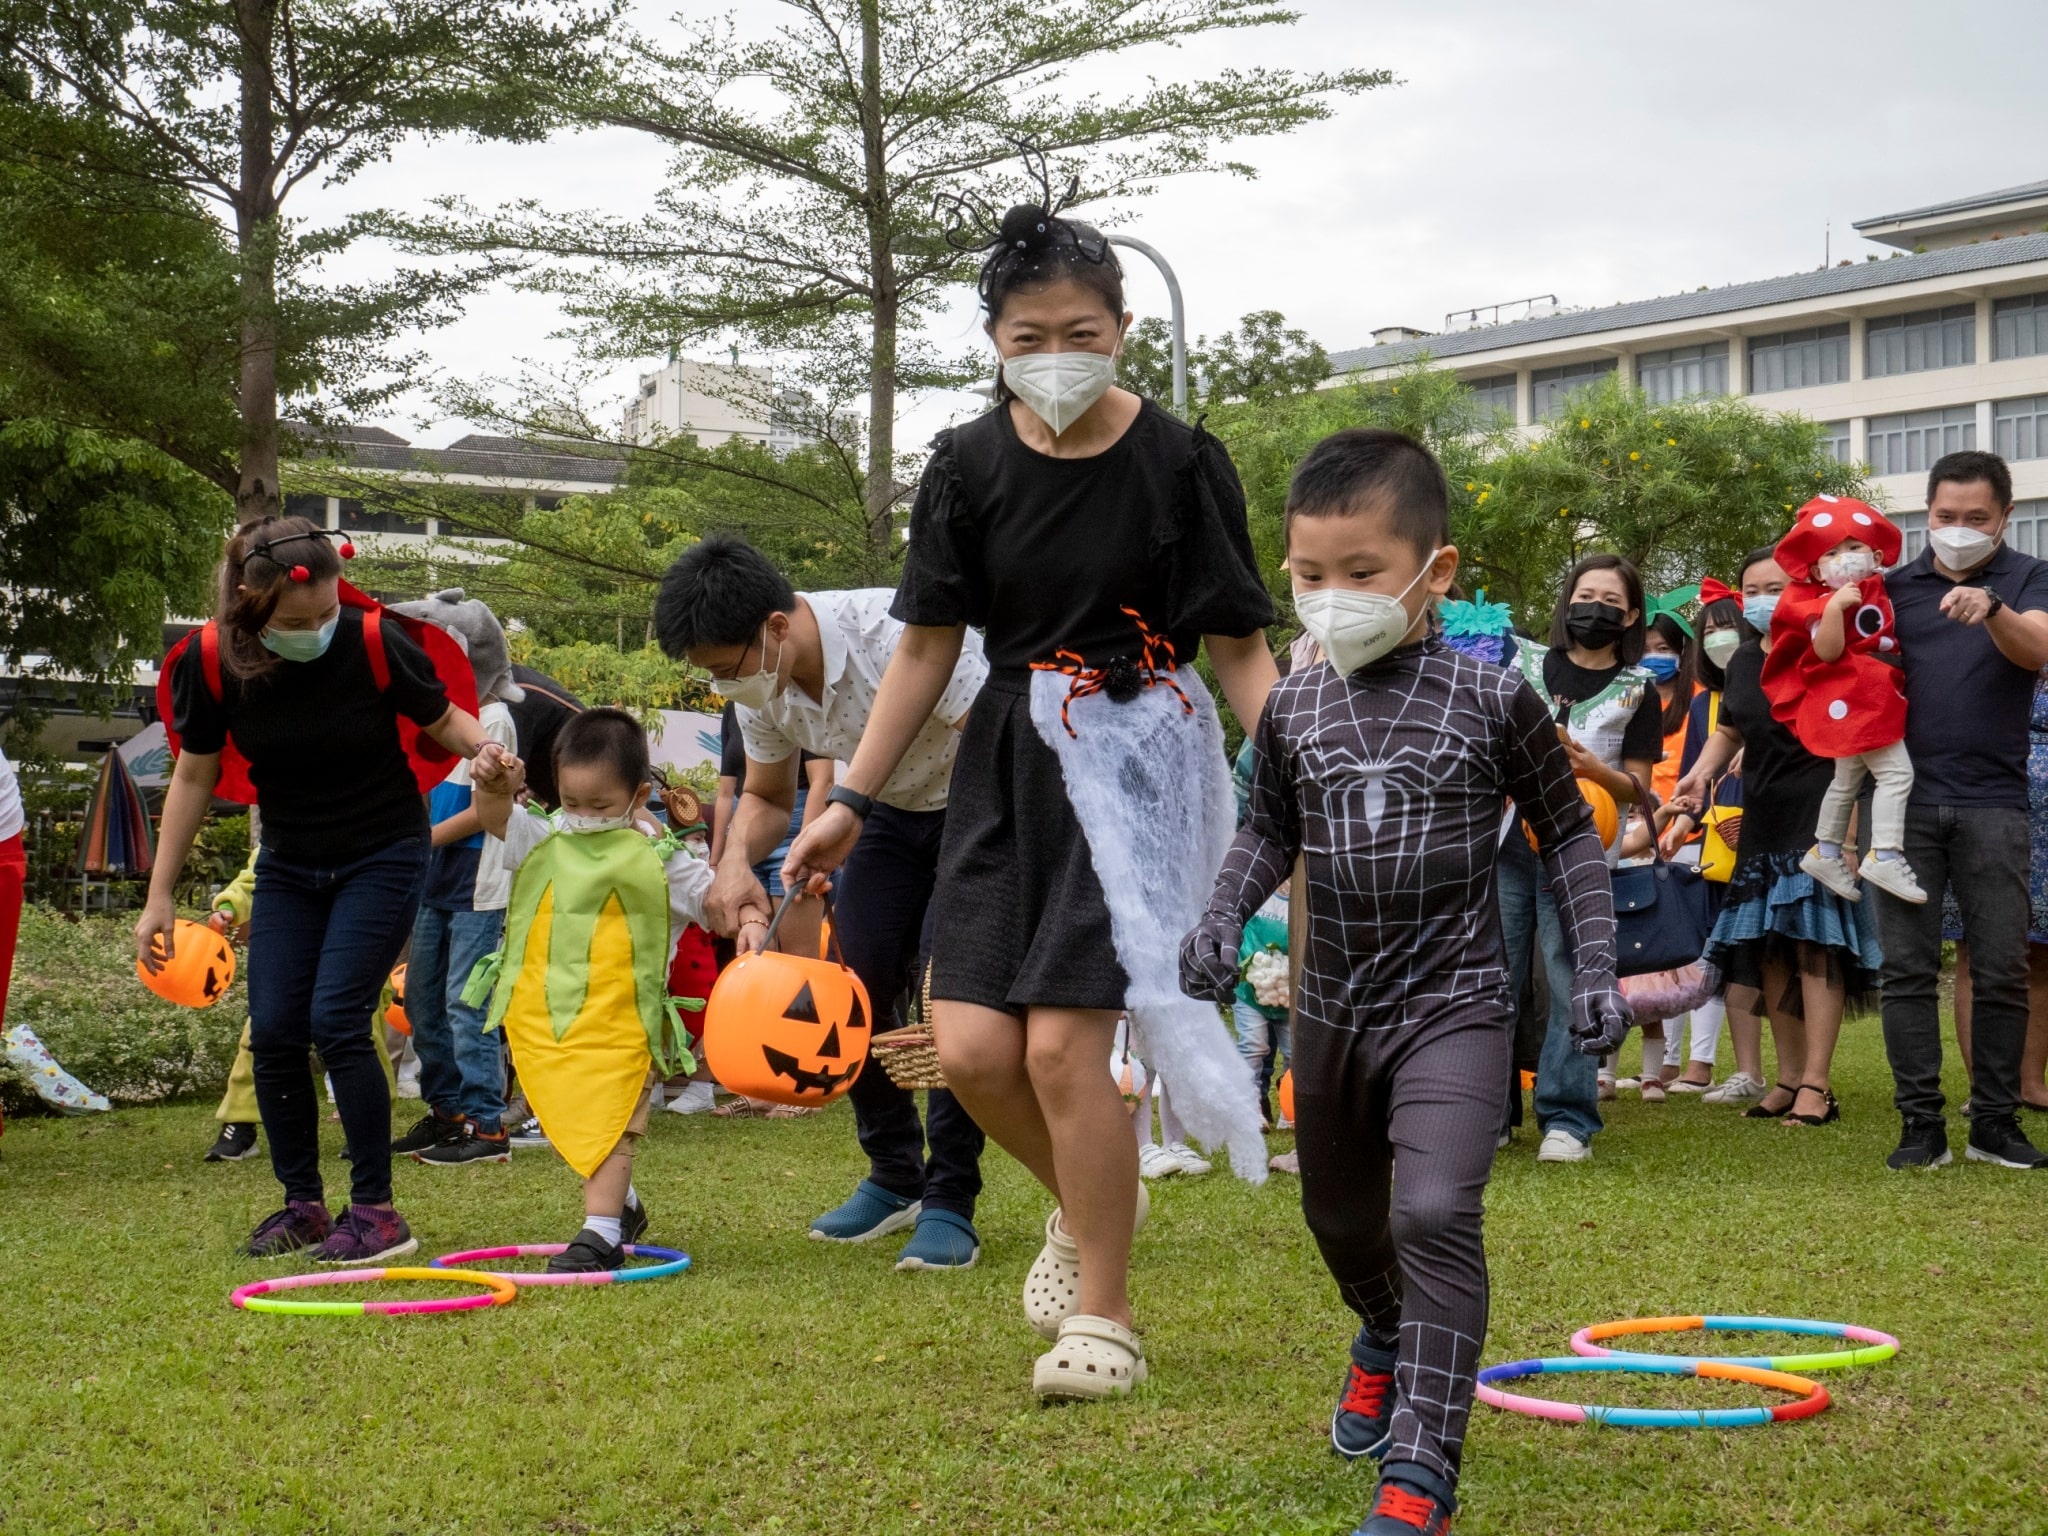 Aileen Cua guides her son during the obstacle course. “I had fun during the obstacle course, and my son really enjoyed getting the candies and toys, so we’re very happy today,” she says. 【Photo by Matt Serrano】